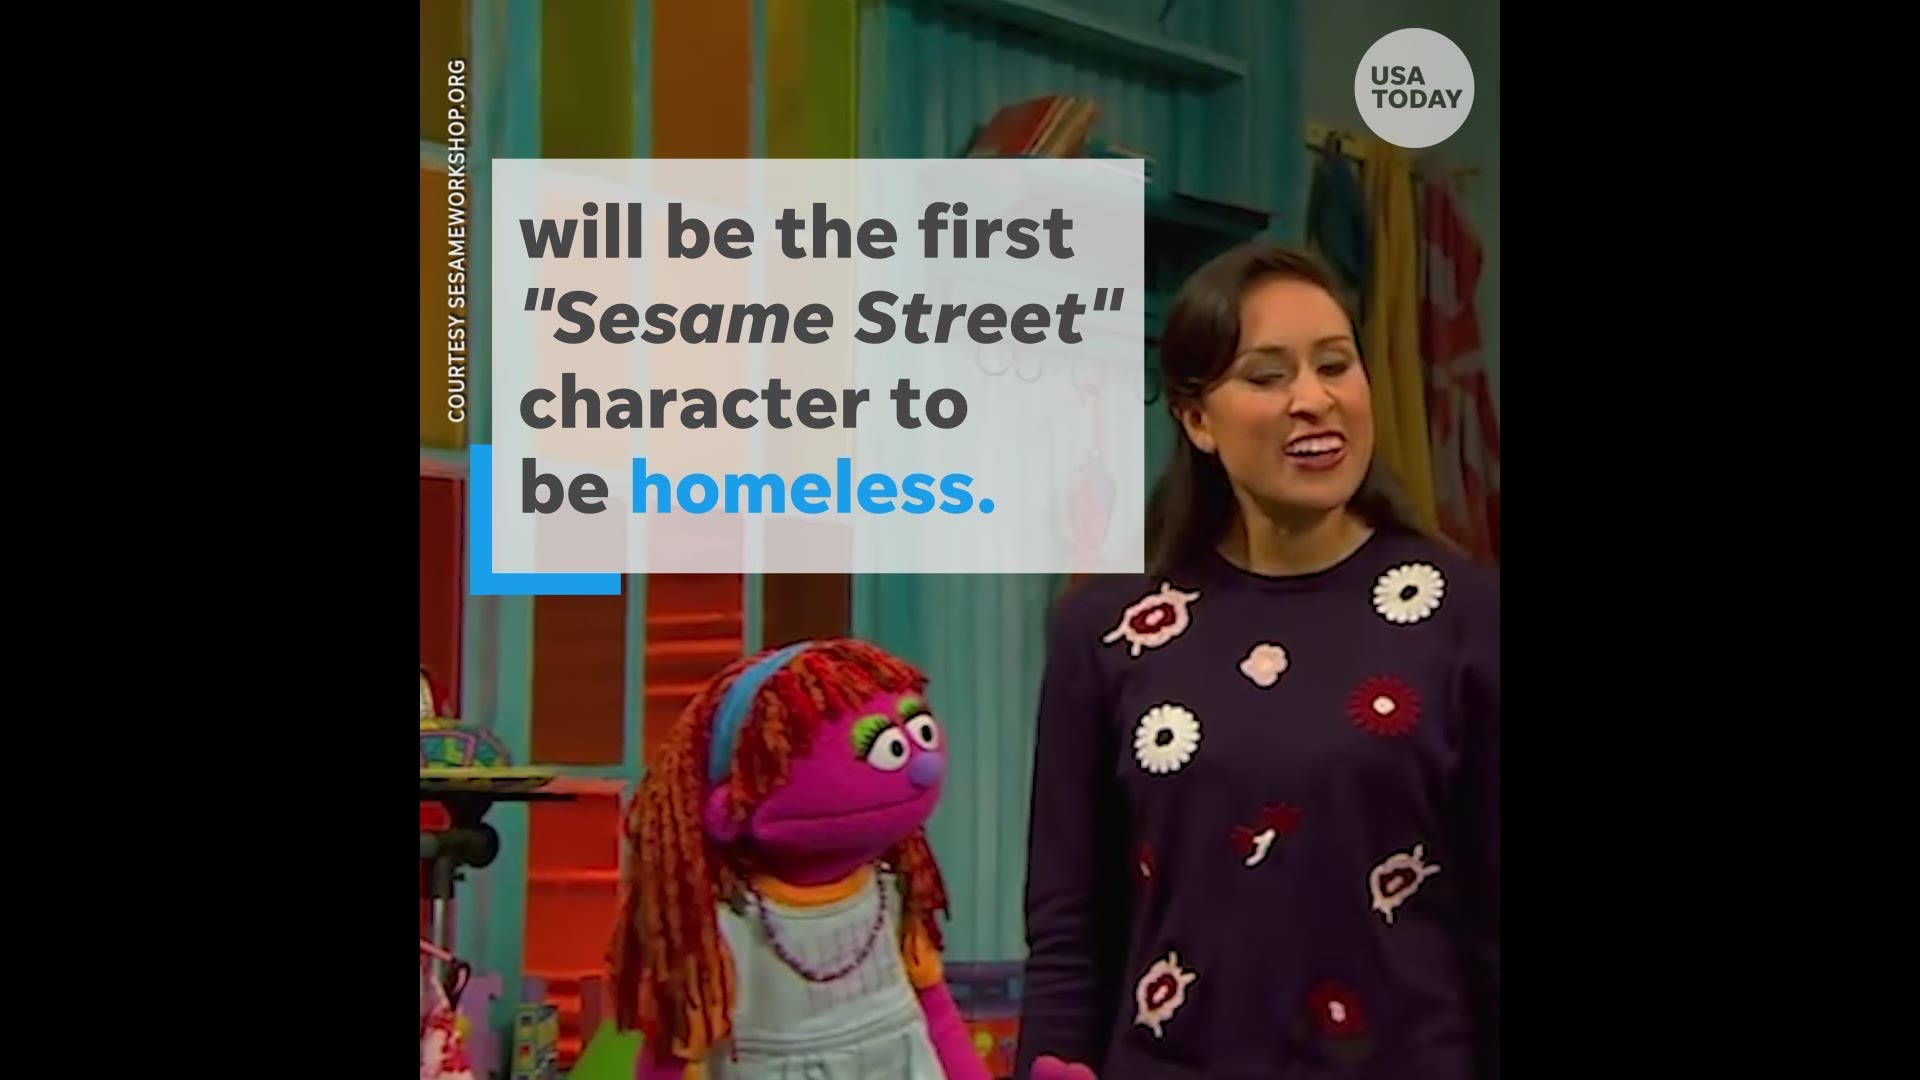 Lily, the first homeless character on "Sesame Street," will teach kids a lesson of hope and love. (USA TODAY)